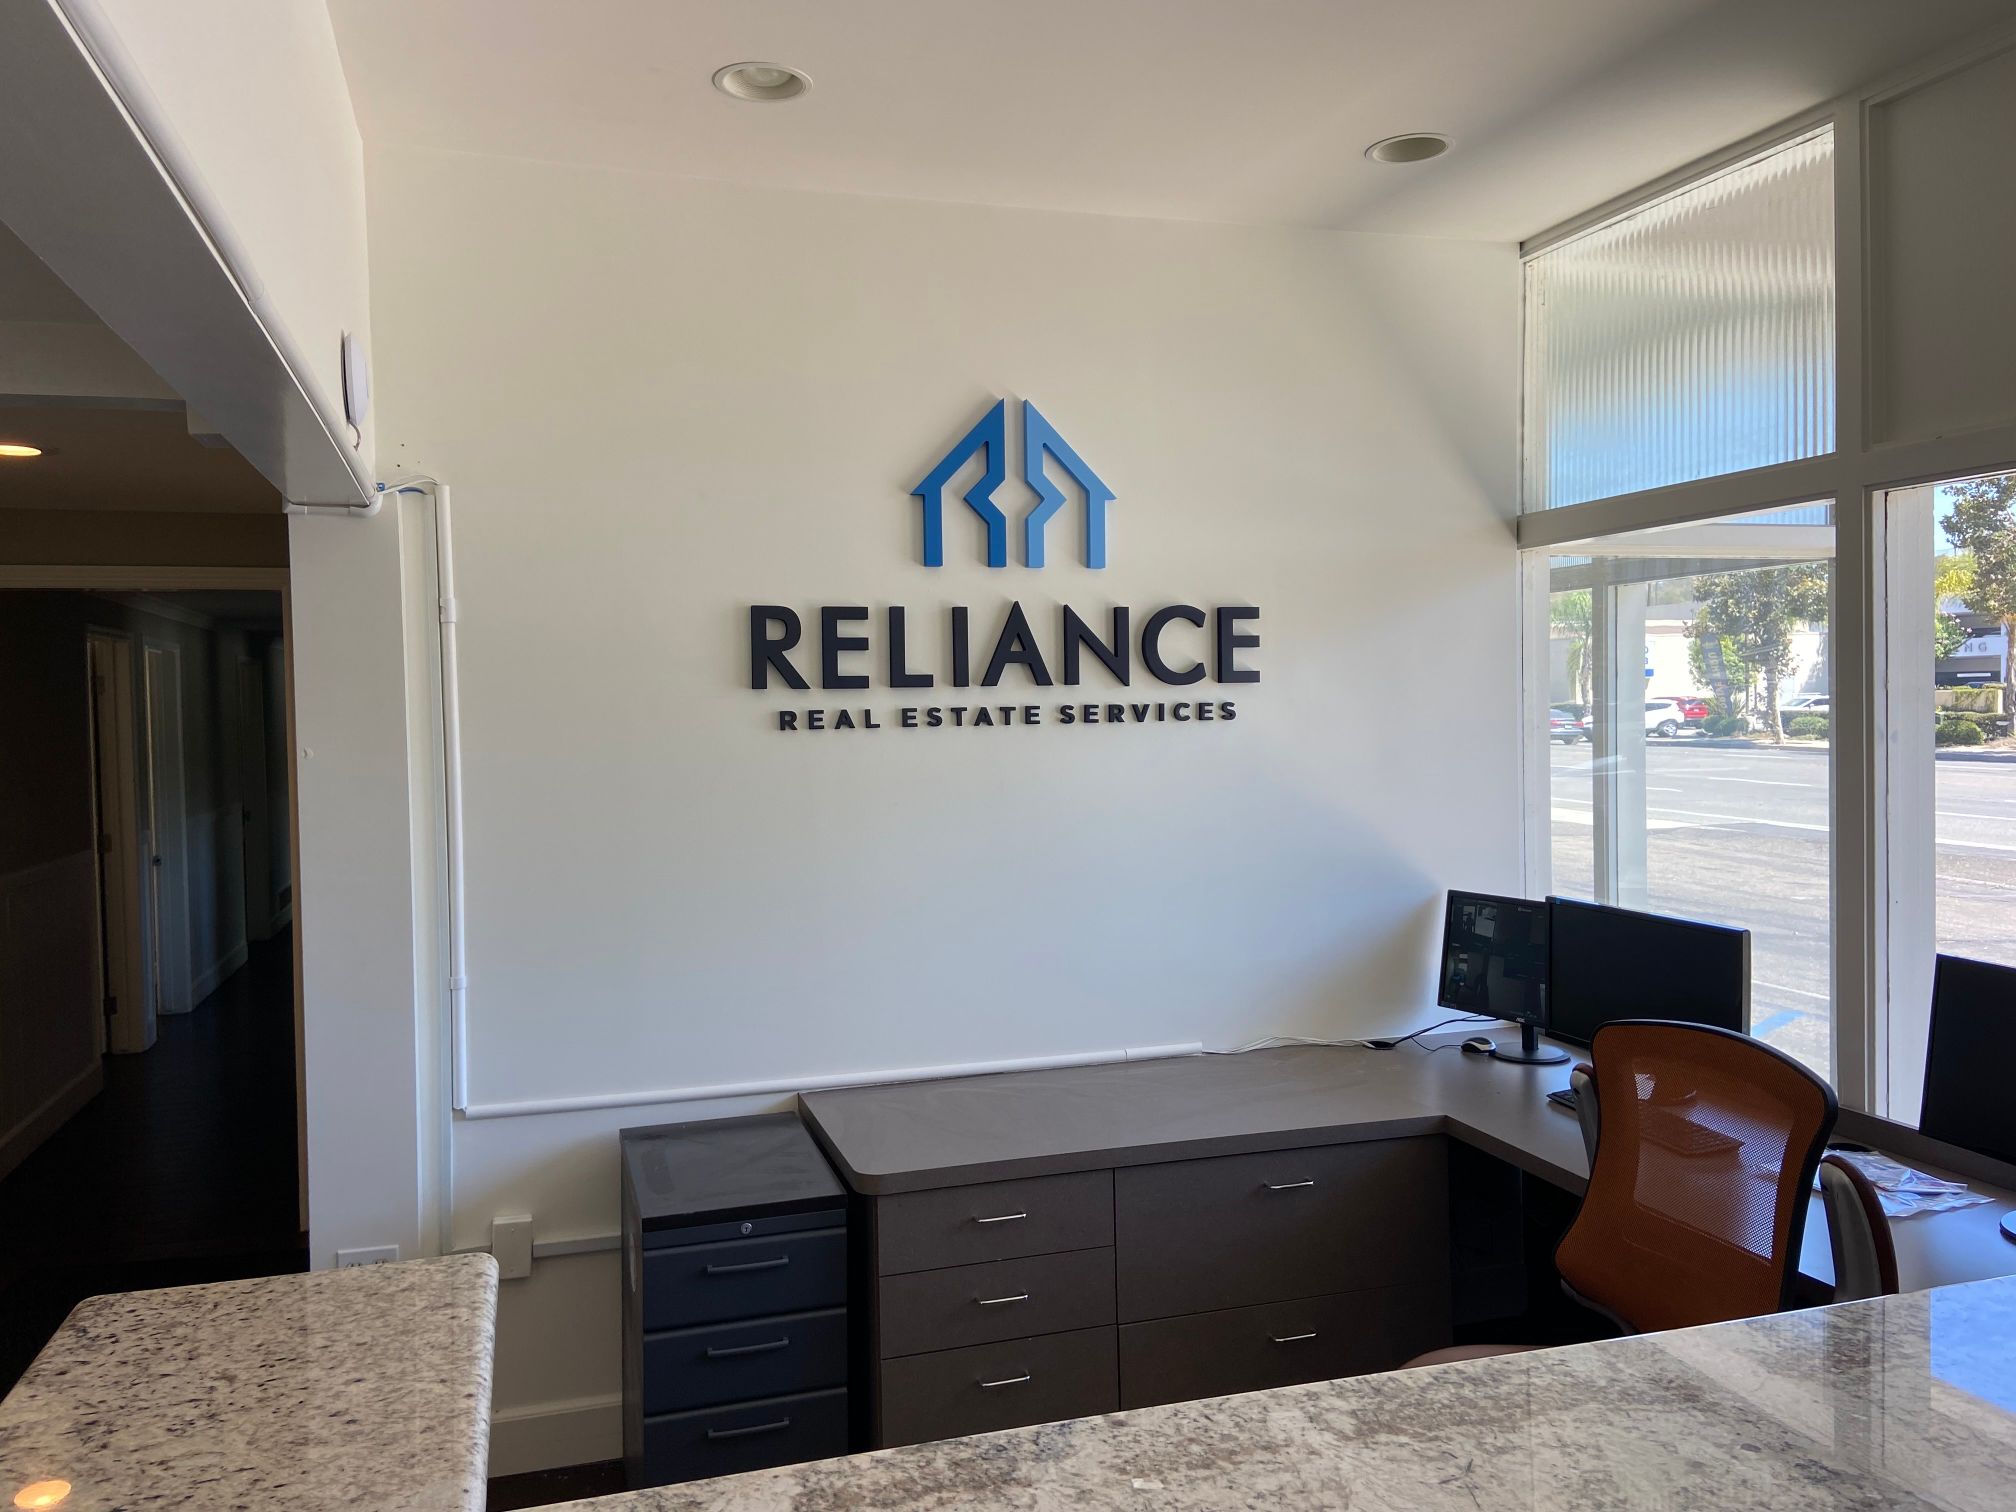 Custom Lobby Wall Logo Signs for Offices in Fullerton CA Welcome Visitors